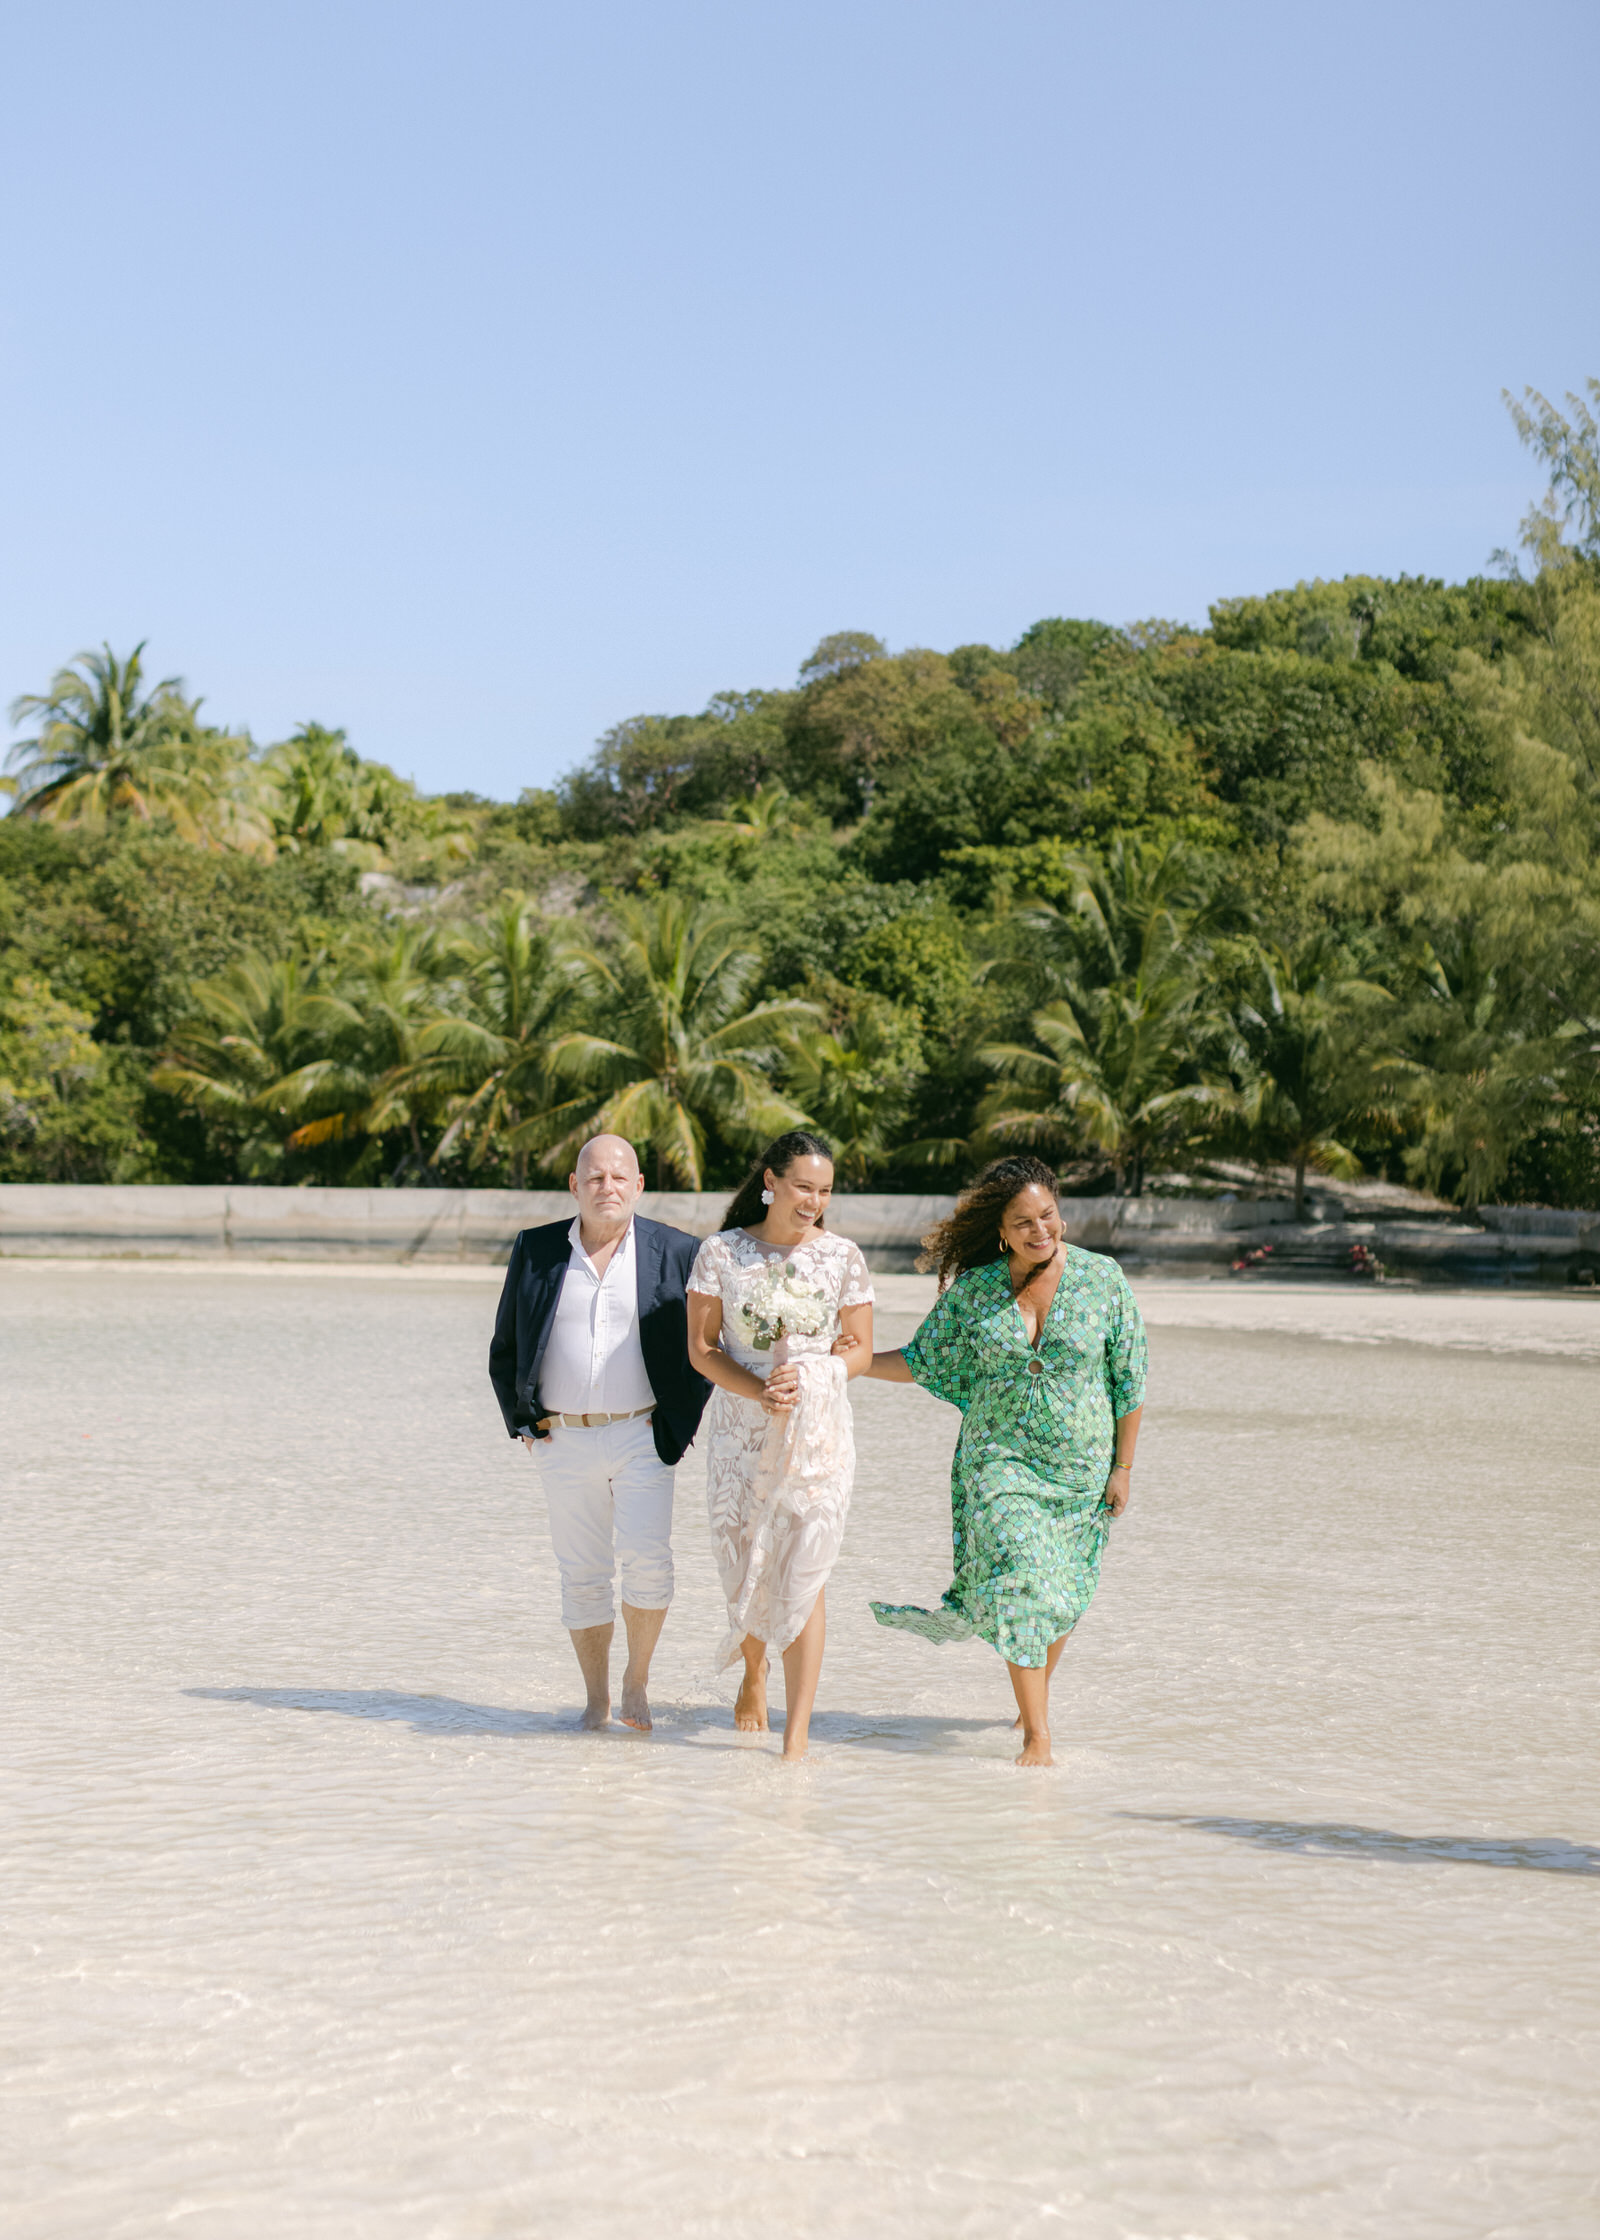 After Getting Married on a Sandbank, This Bride Celebrated With ...